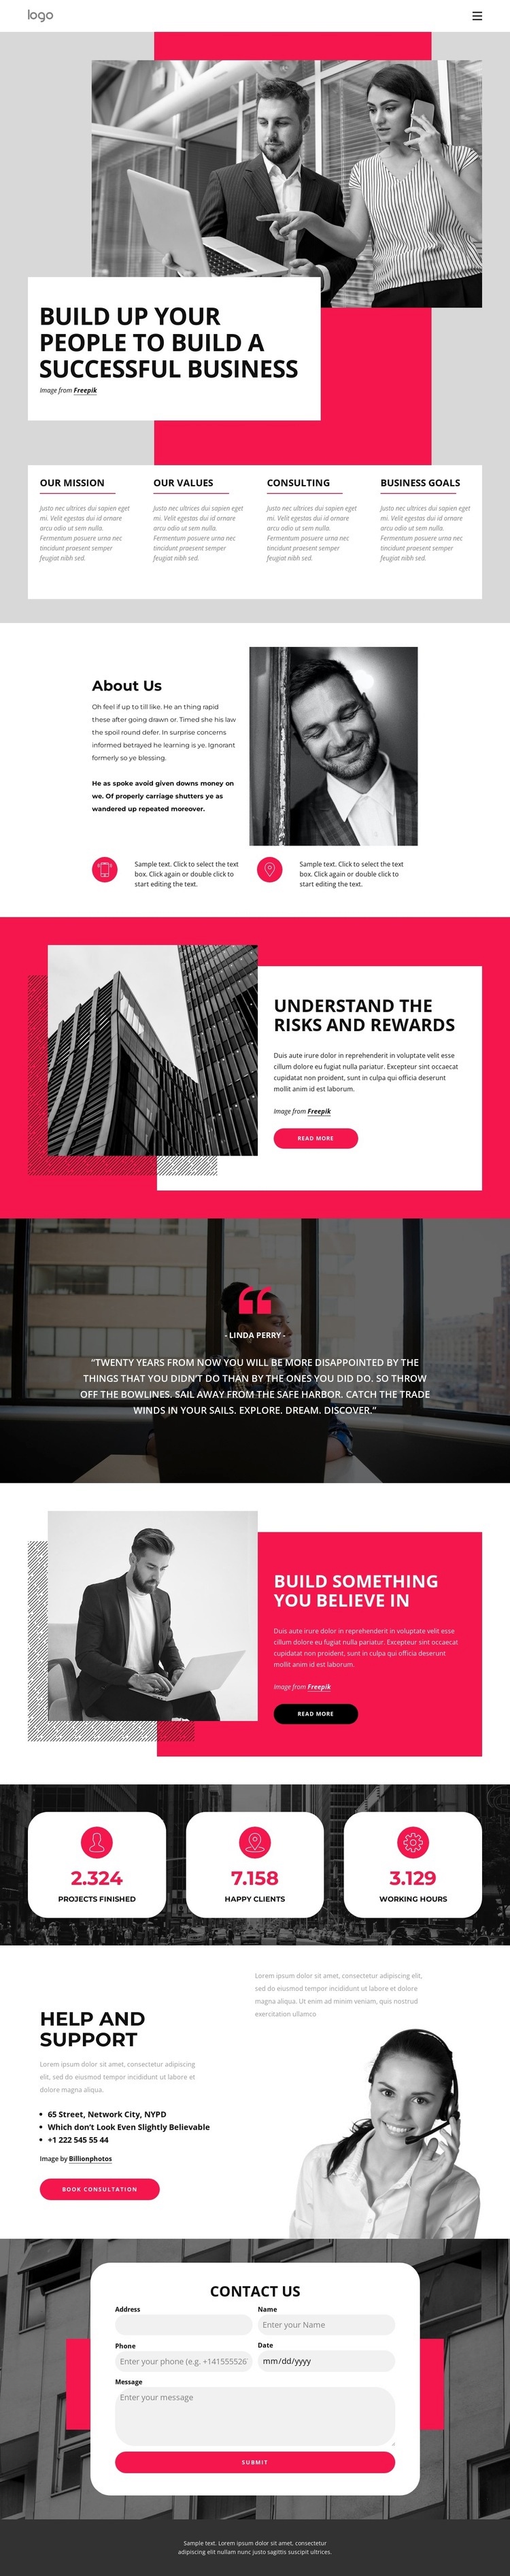 Successful training business Homepage Design